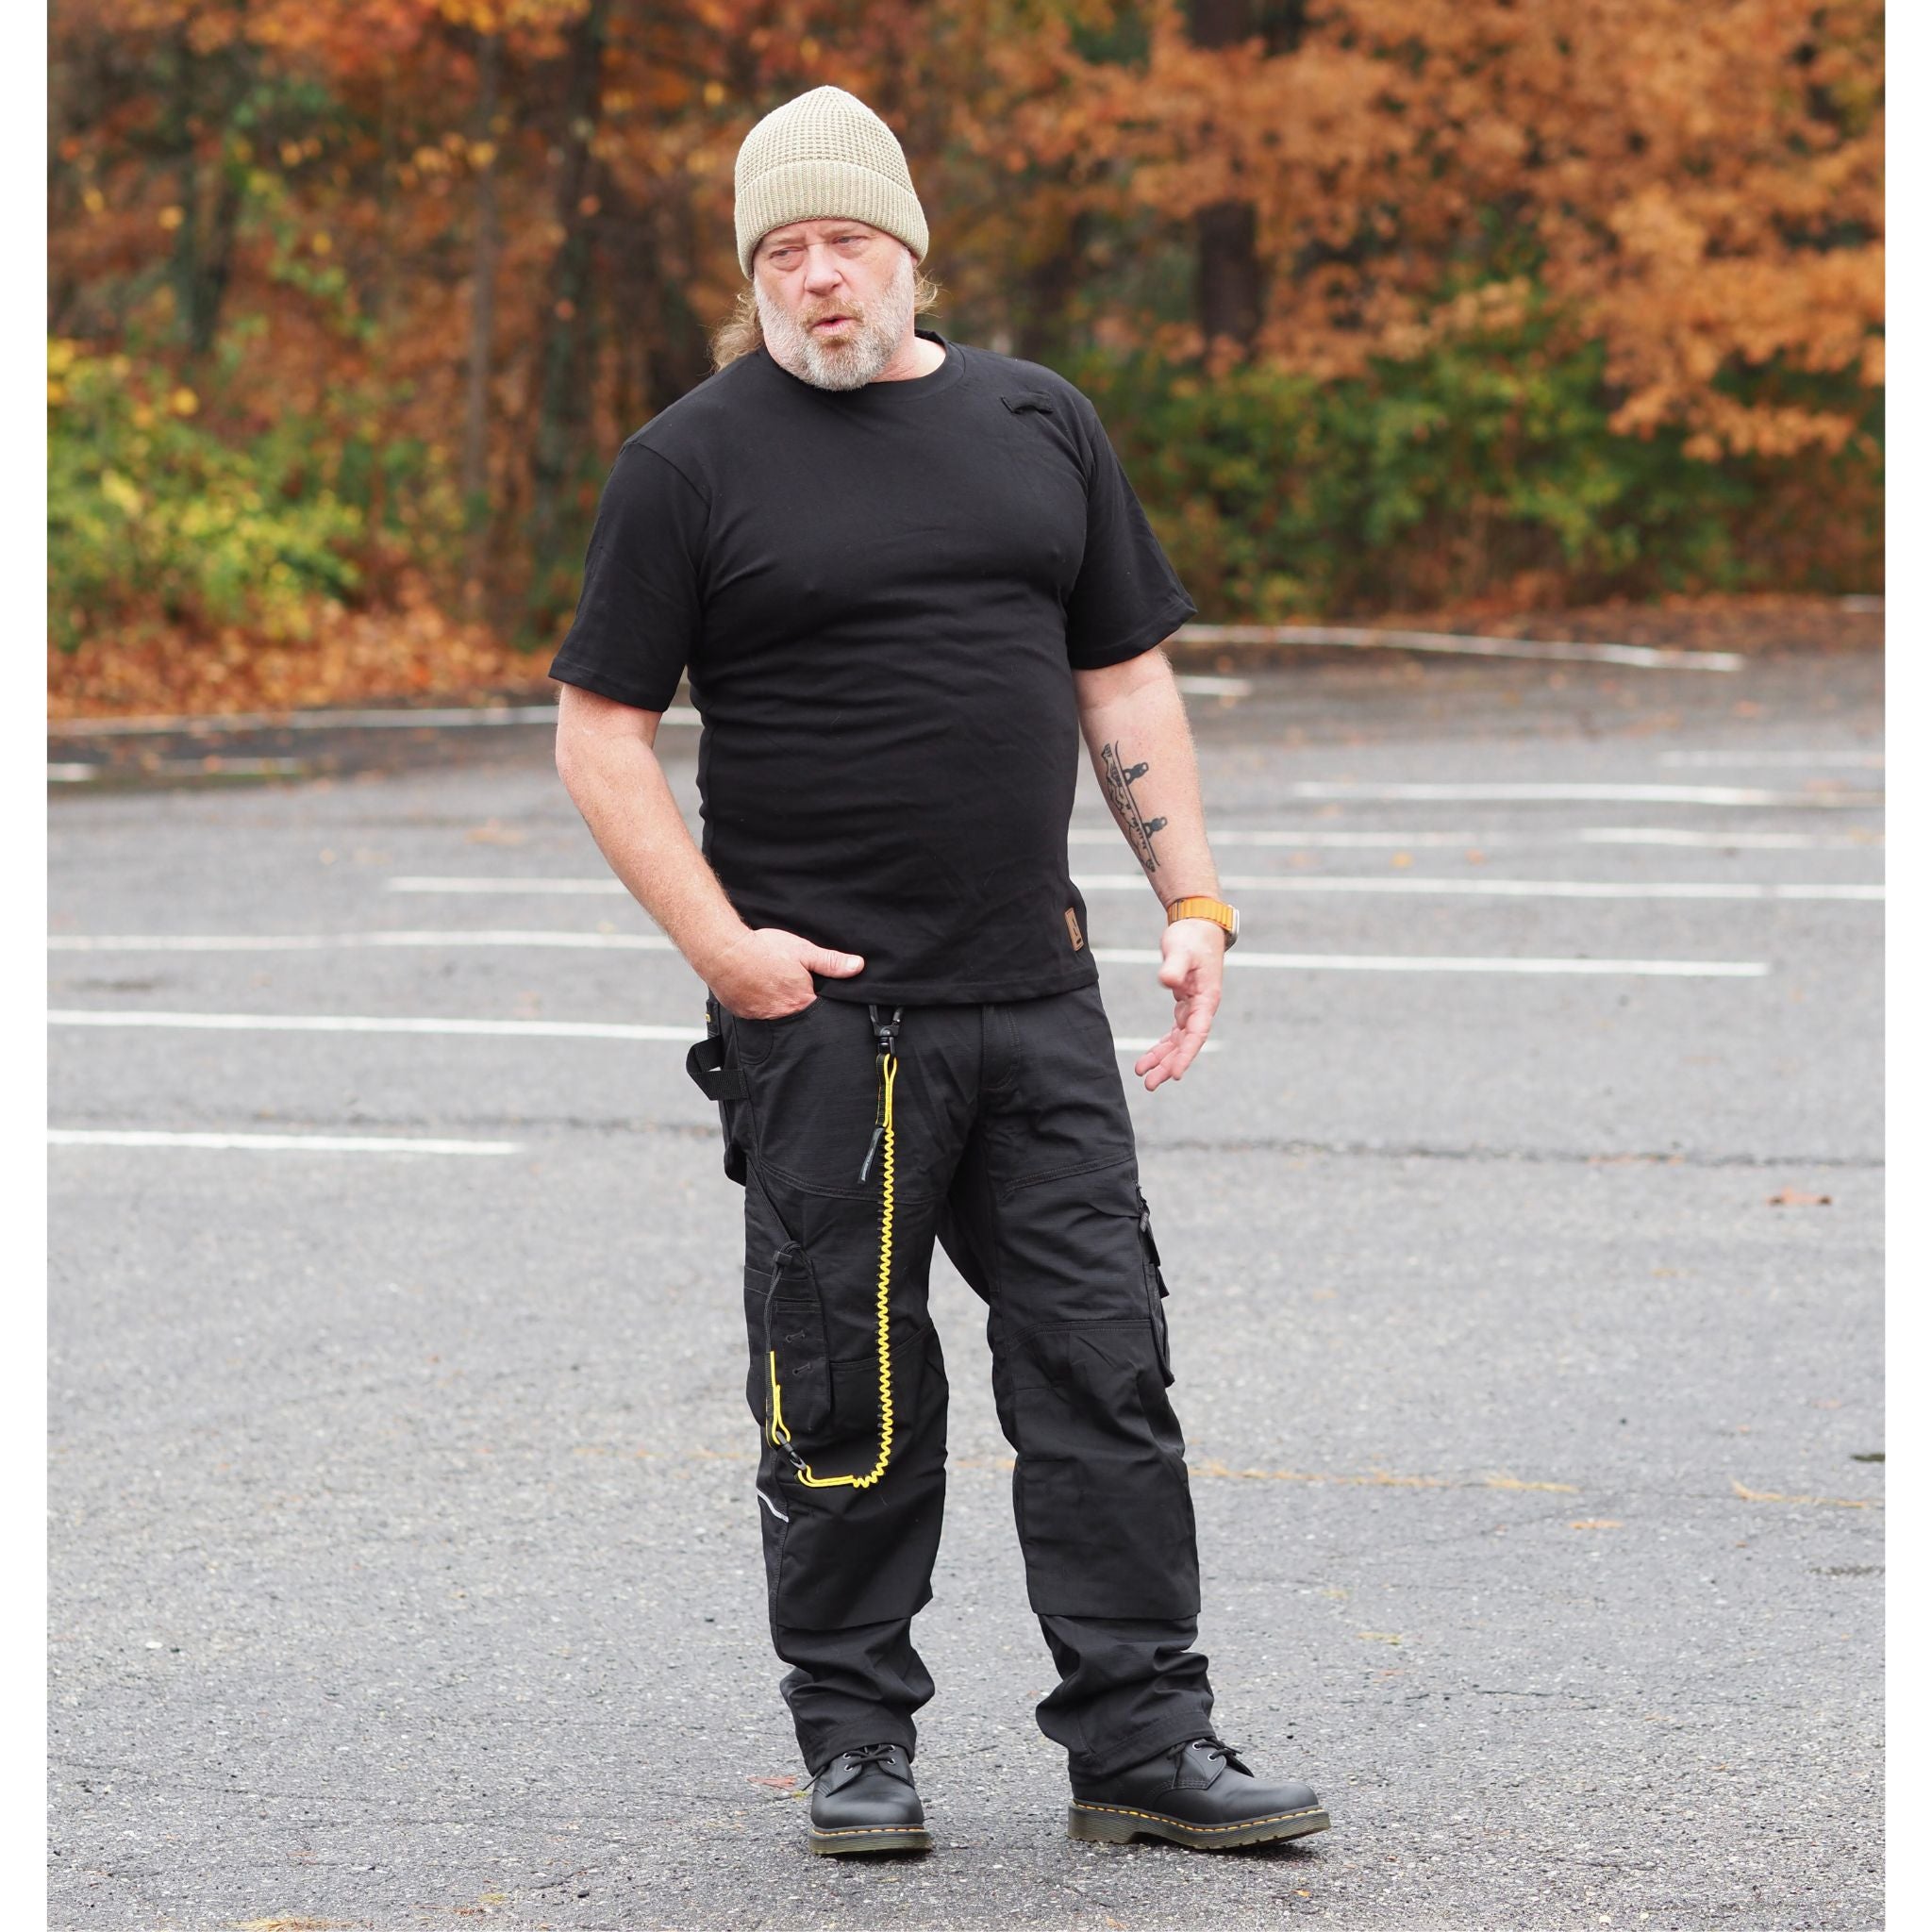 Men's black stagehand pants and stagehand shirt